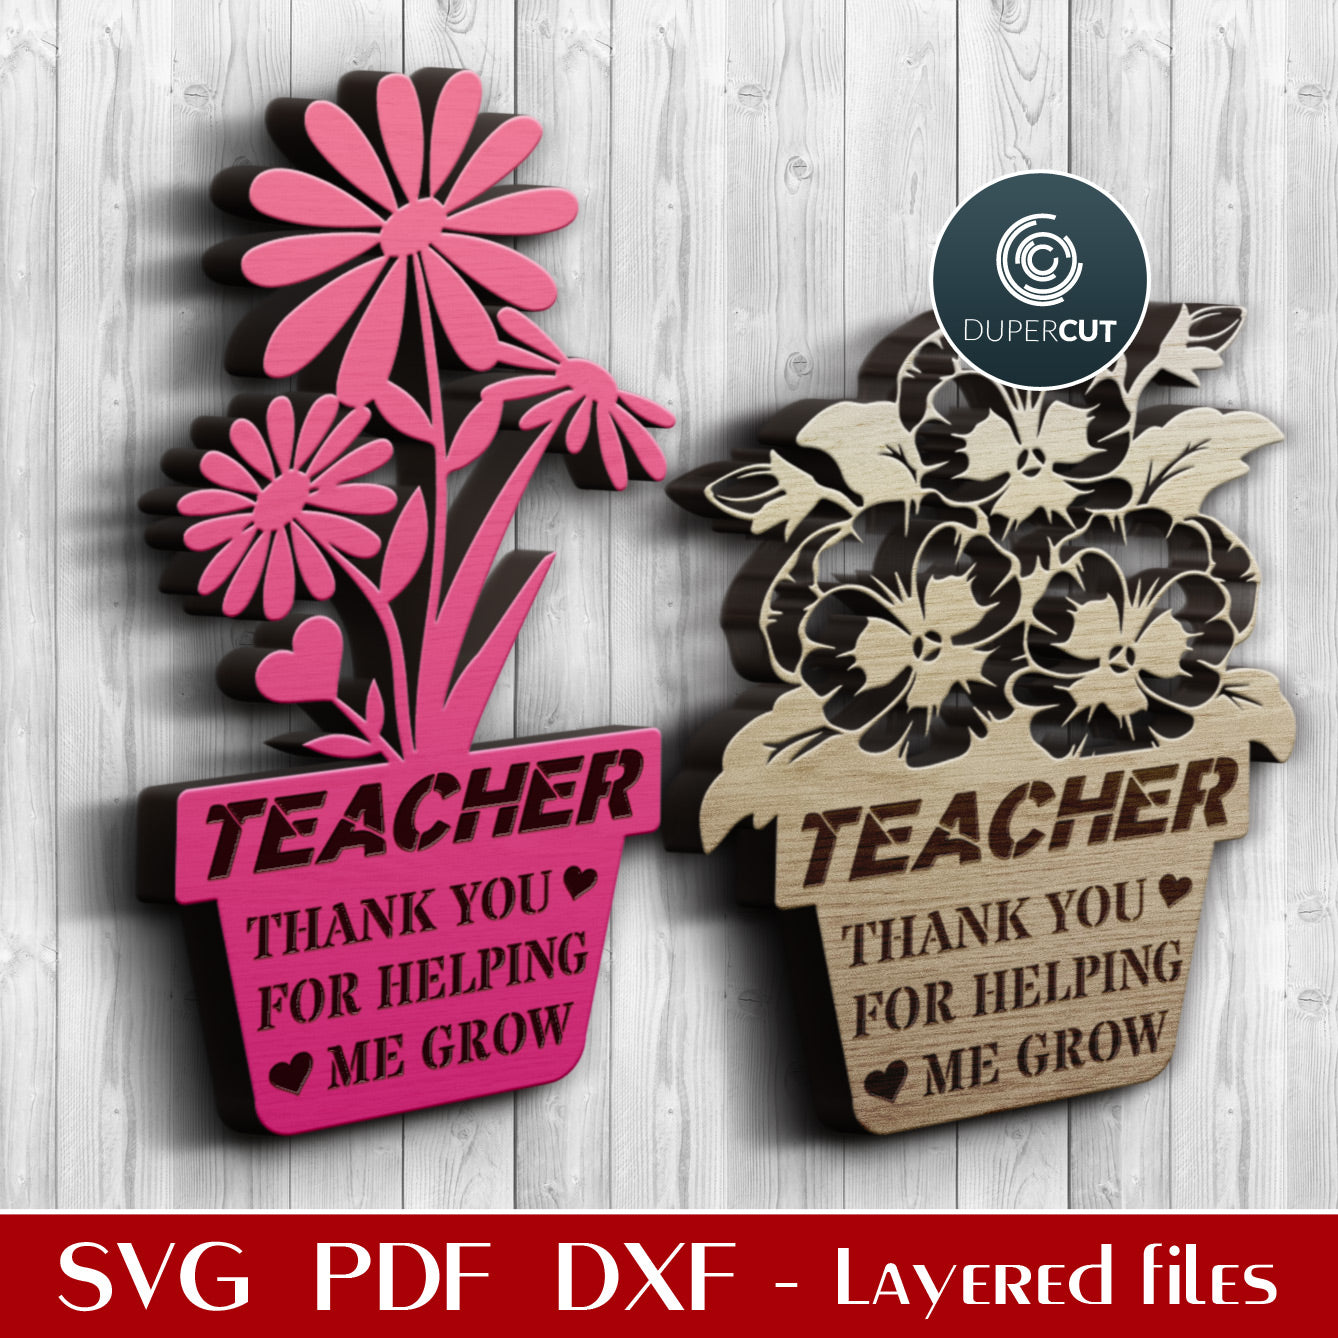 Personalized DIY gift for teacher, flower pot, cake topper template - SVG DXF PNG files for Cricut, Glowforge, Silhouette Cameo, CNC Machines